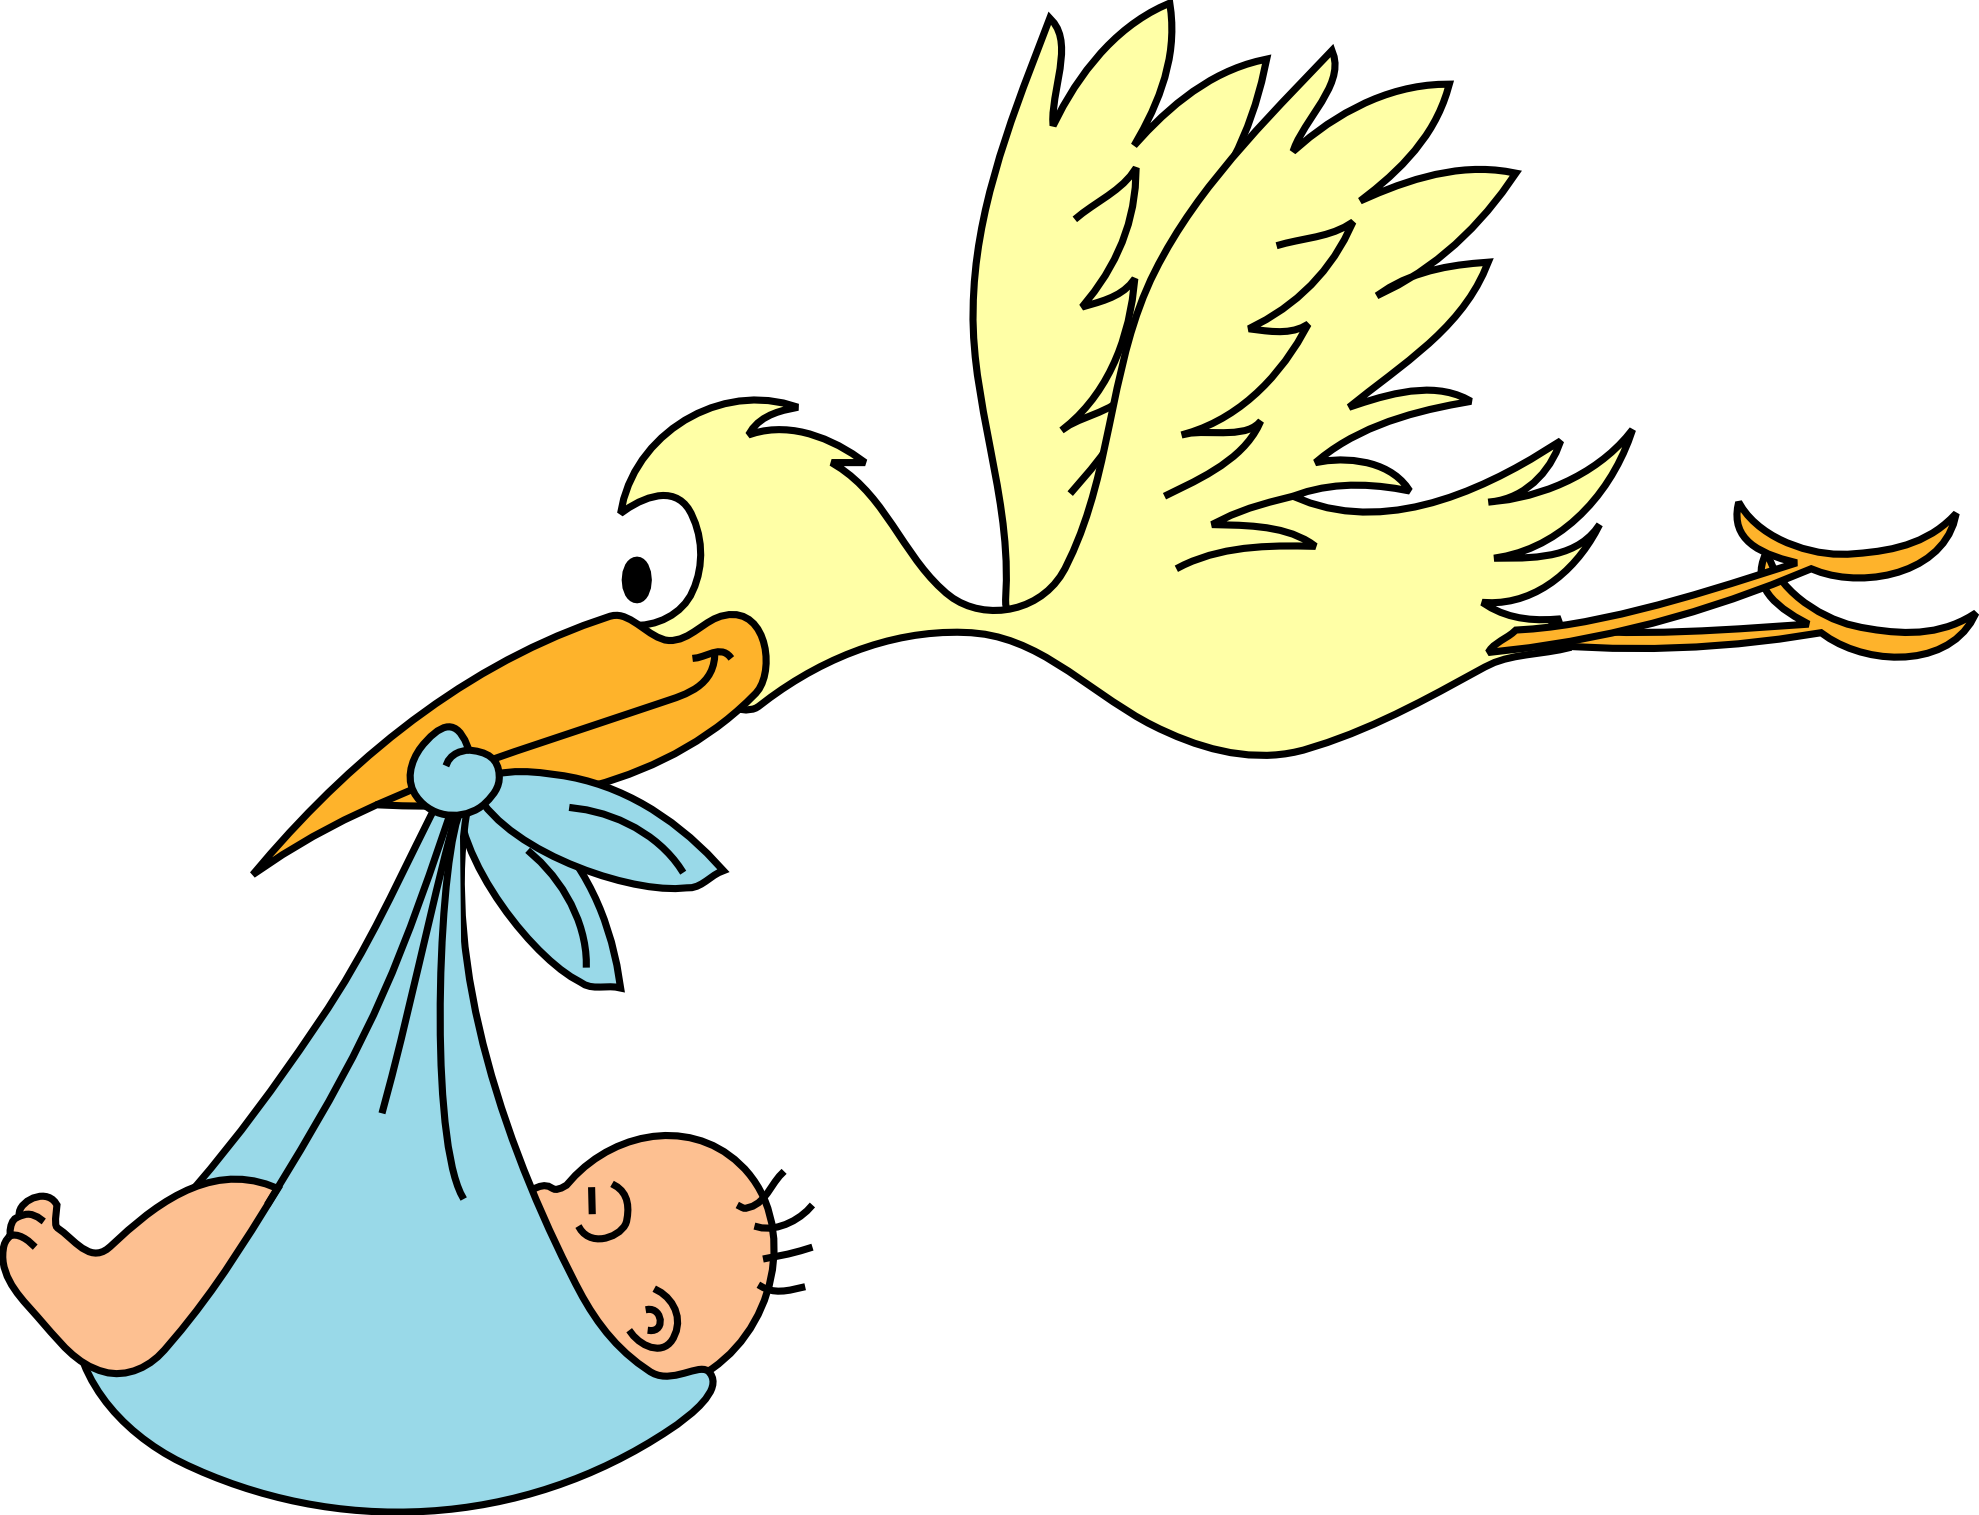 Stork at getdrawings com. Pacifier clipart baby shower